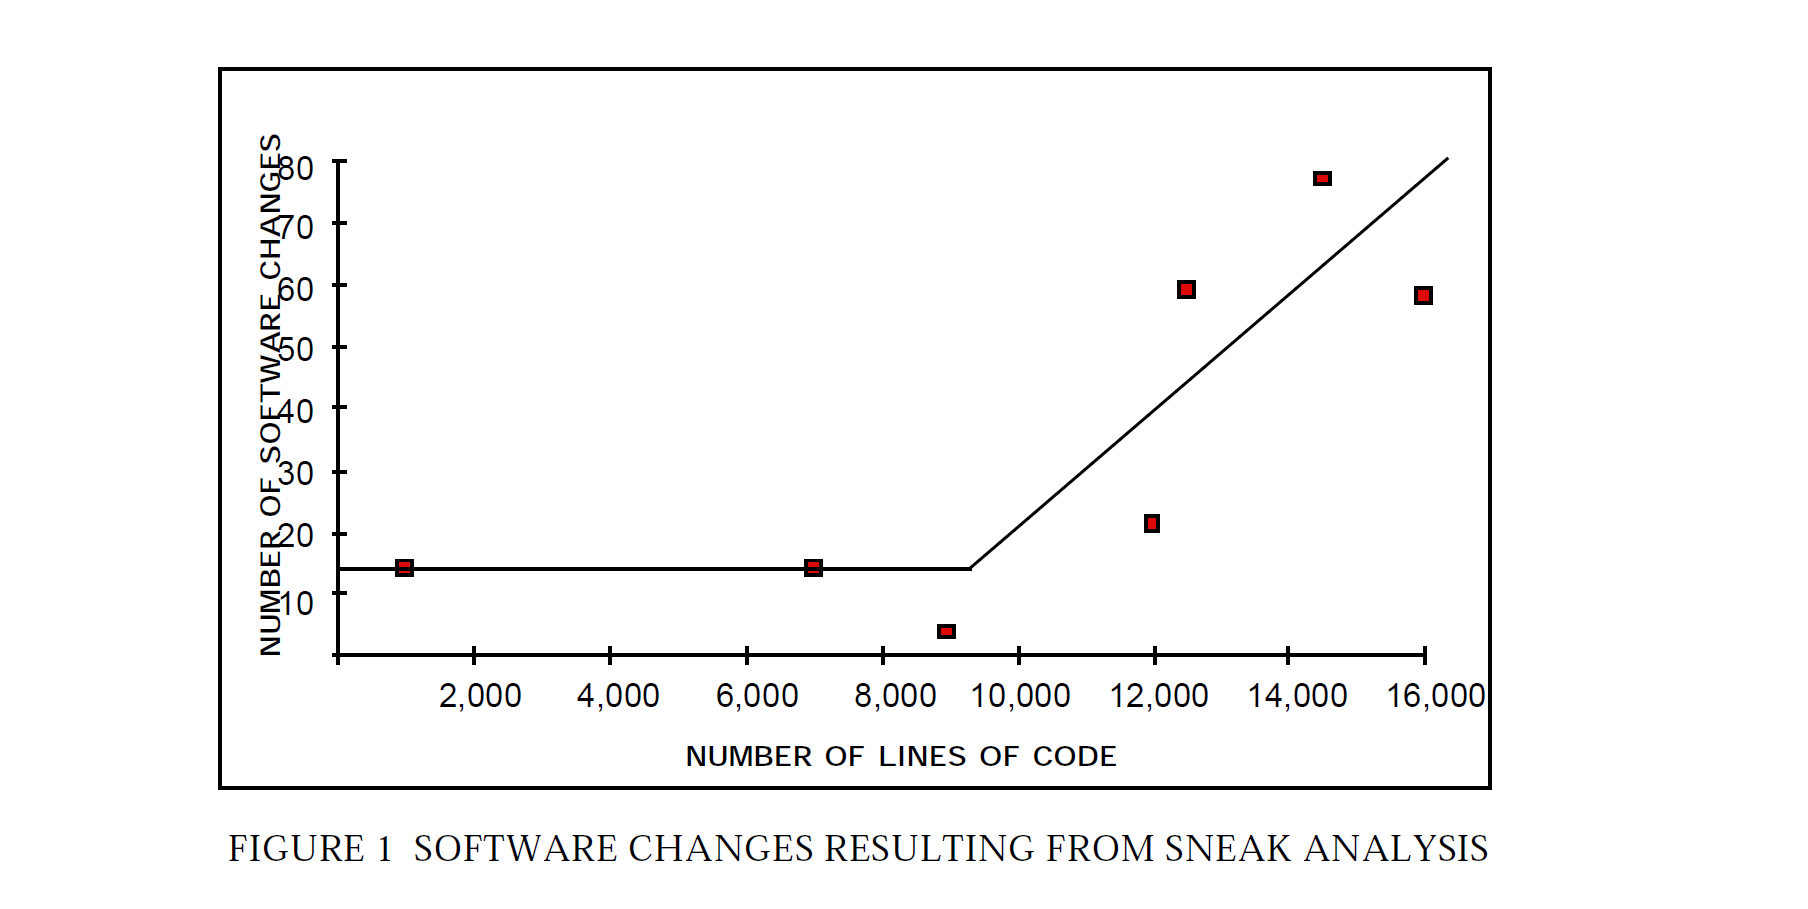 IDA Inc - Software Changes Resulting From Sneak Analsys